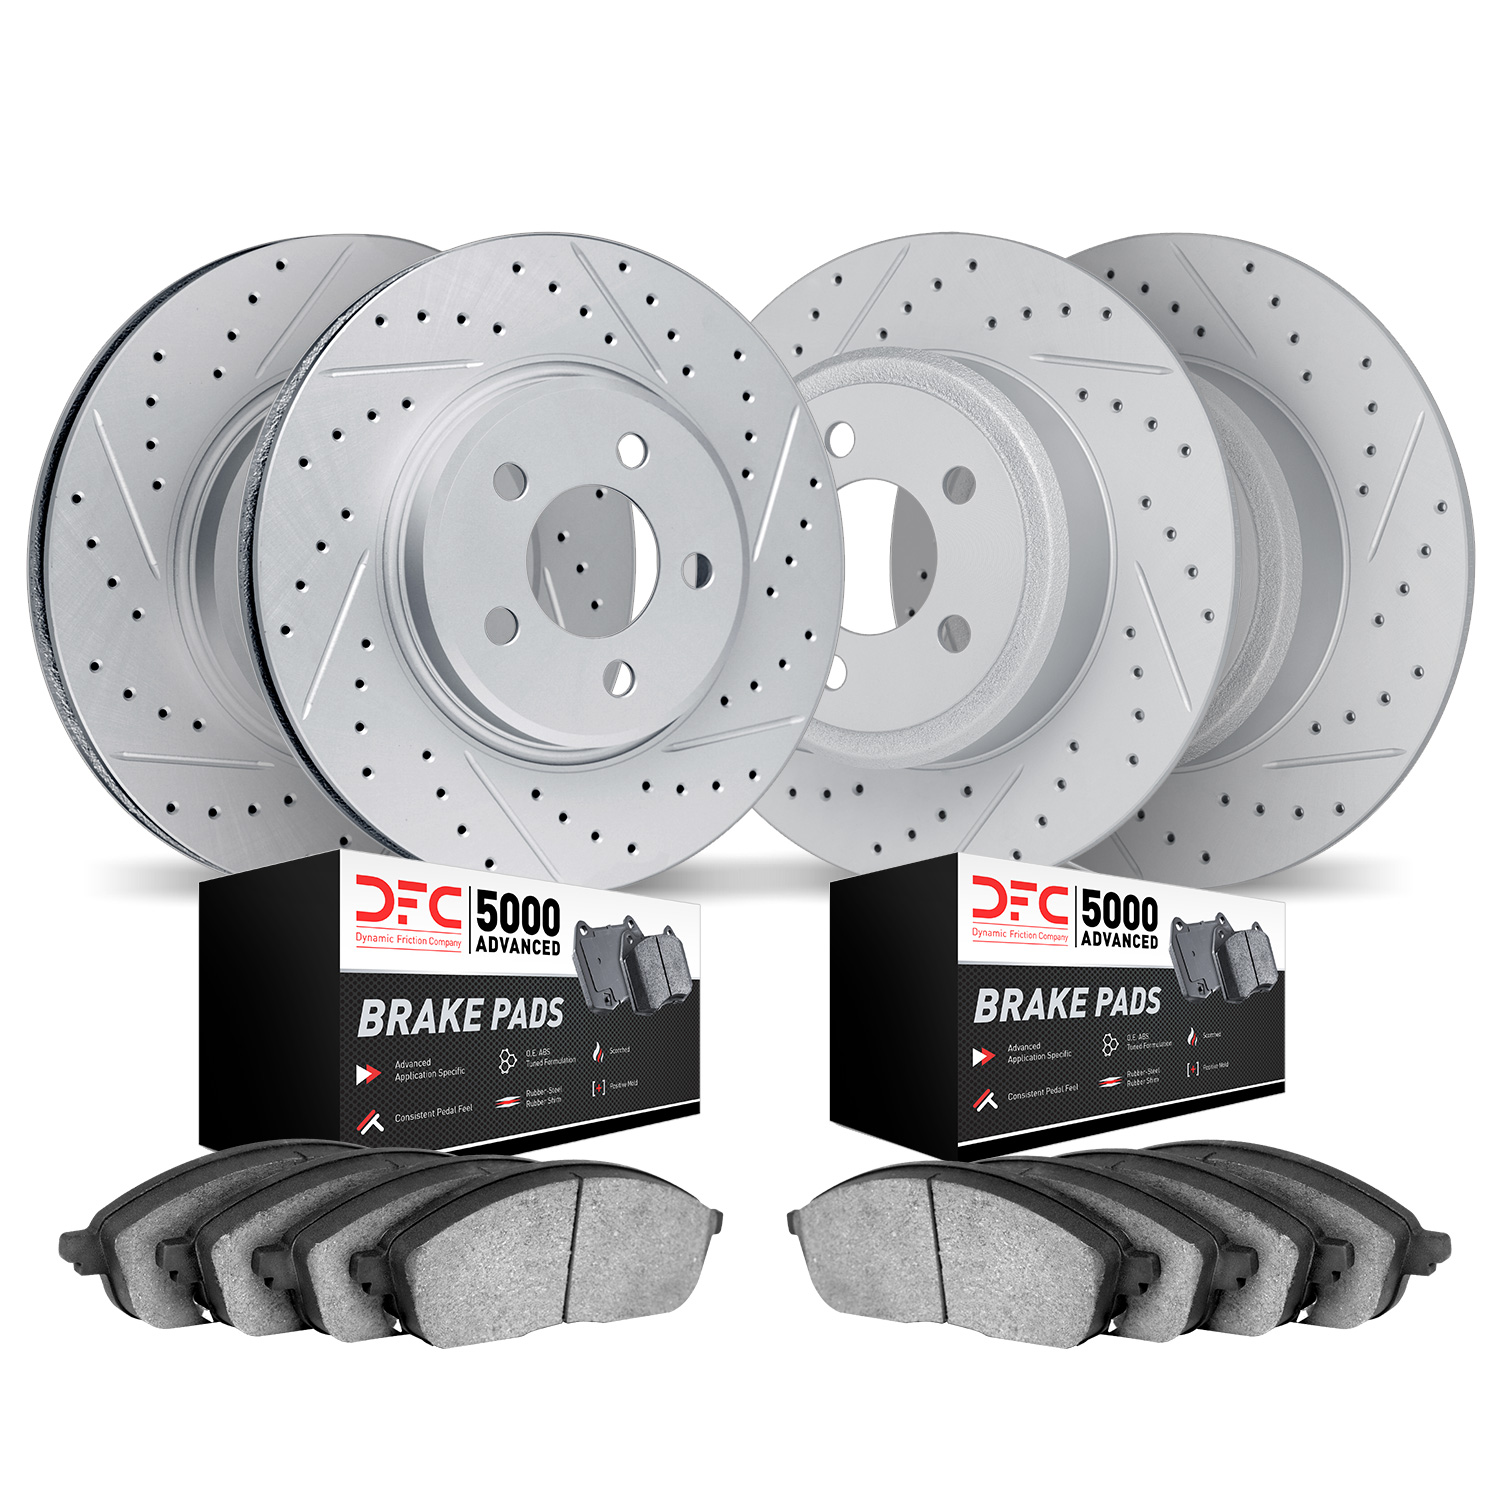 2504-54216 Geoperformance Drilled/Slotted Rotors w/5000 Advanced Brake Pads Kit, 2015-2019 Ford/Lincoln/Mercury/Mazda, Position: